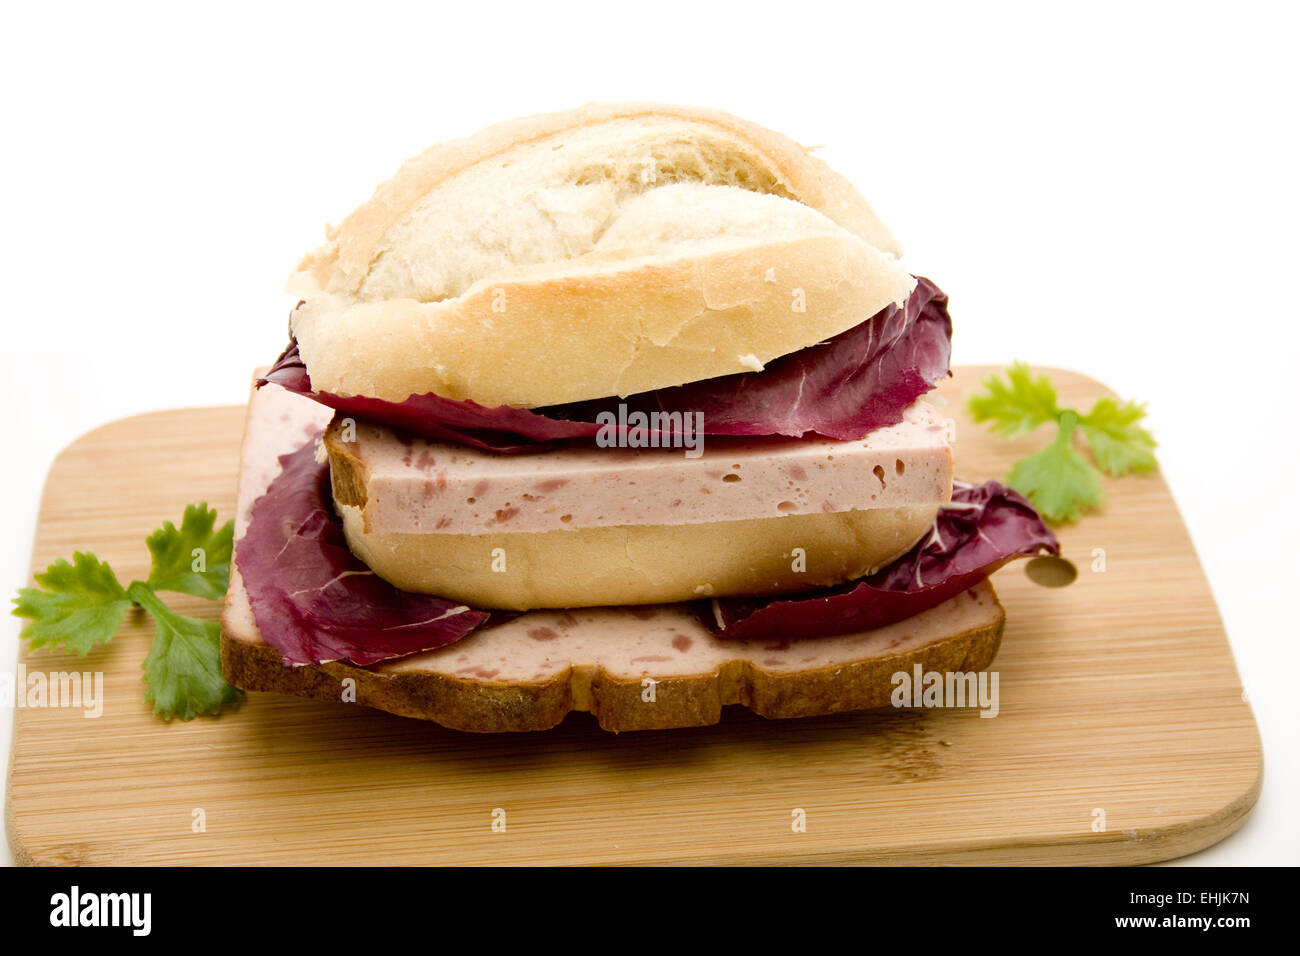 Bread rolls with liver cheese Stock Photo